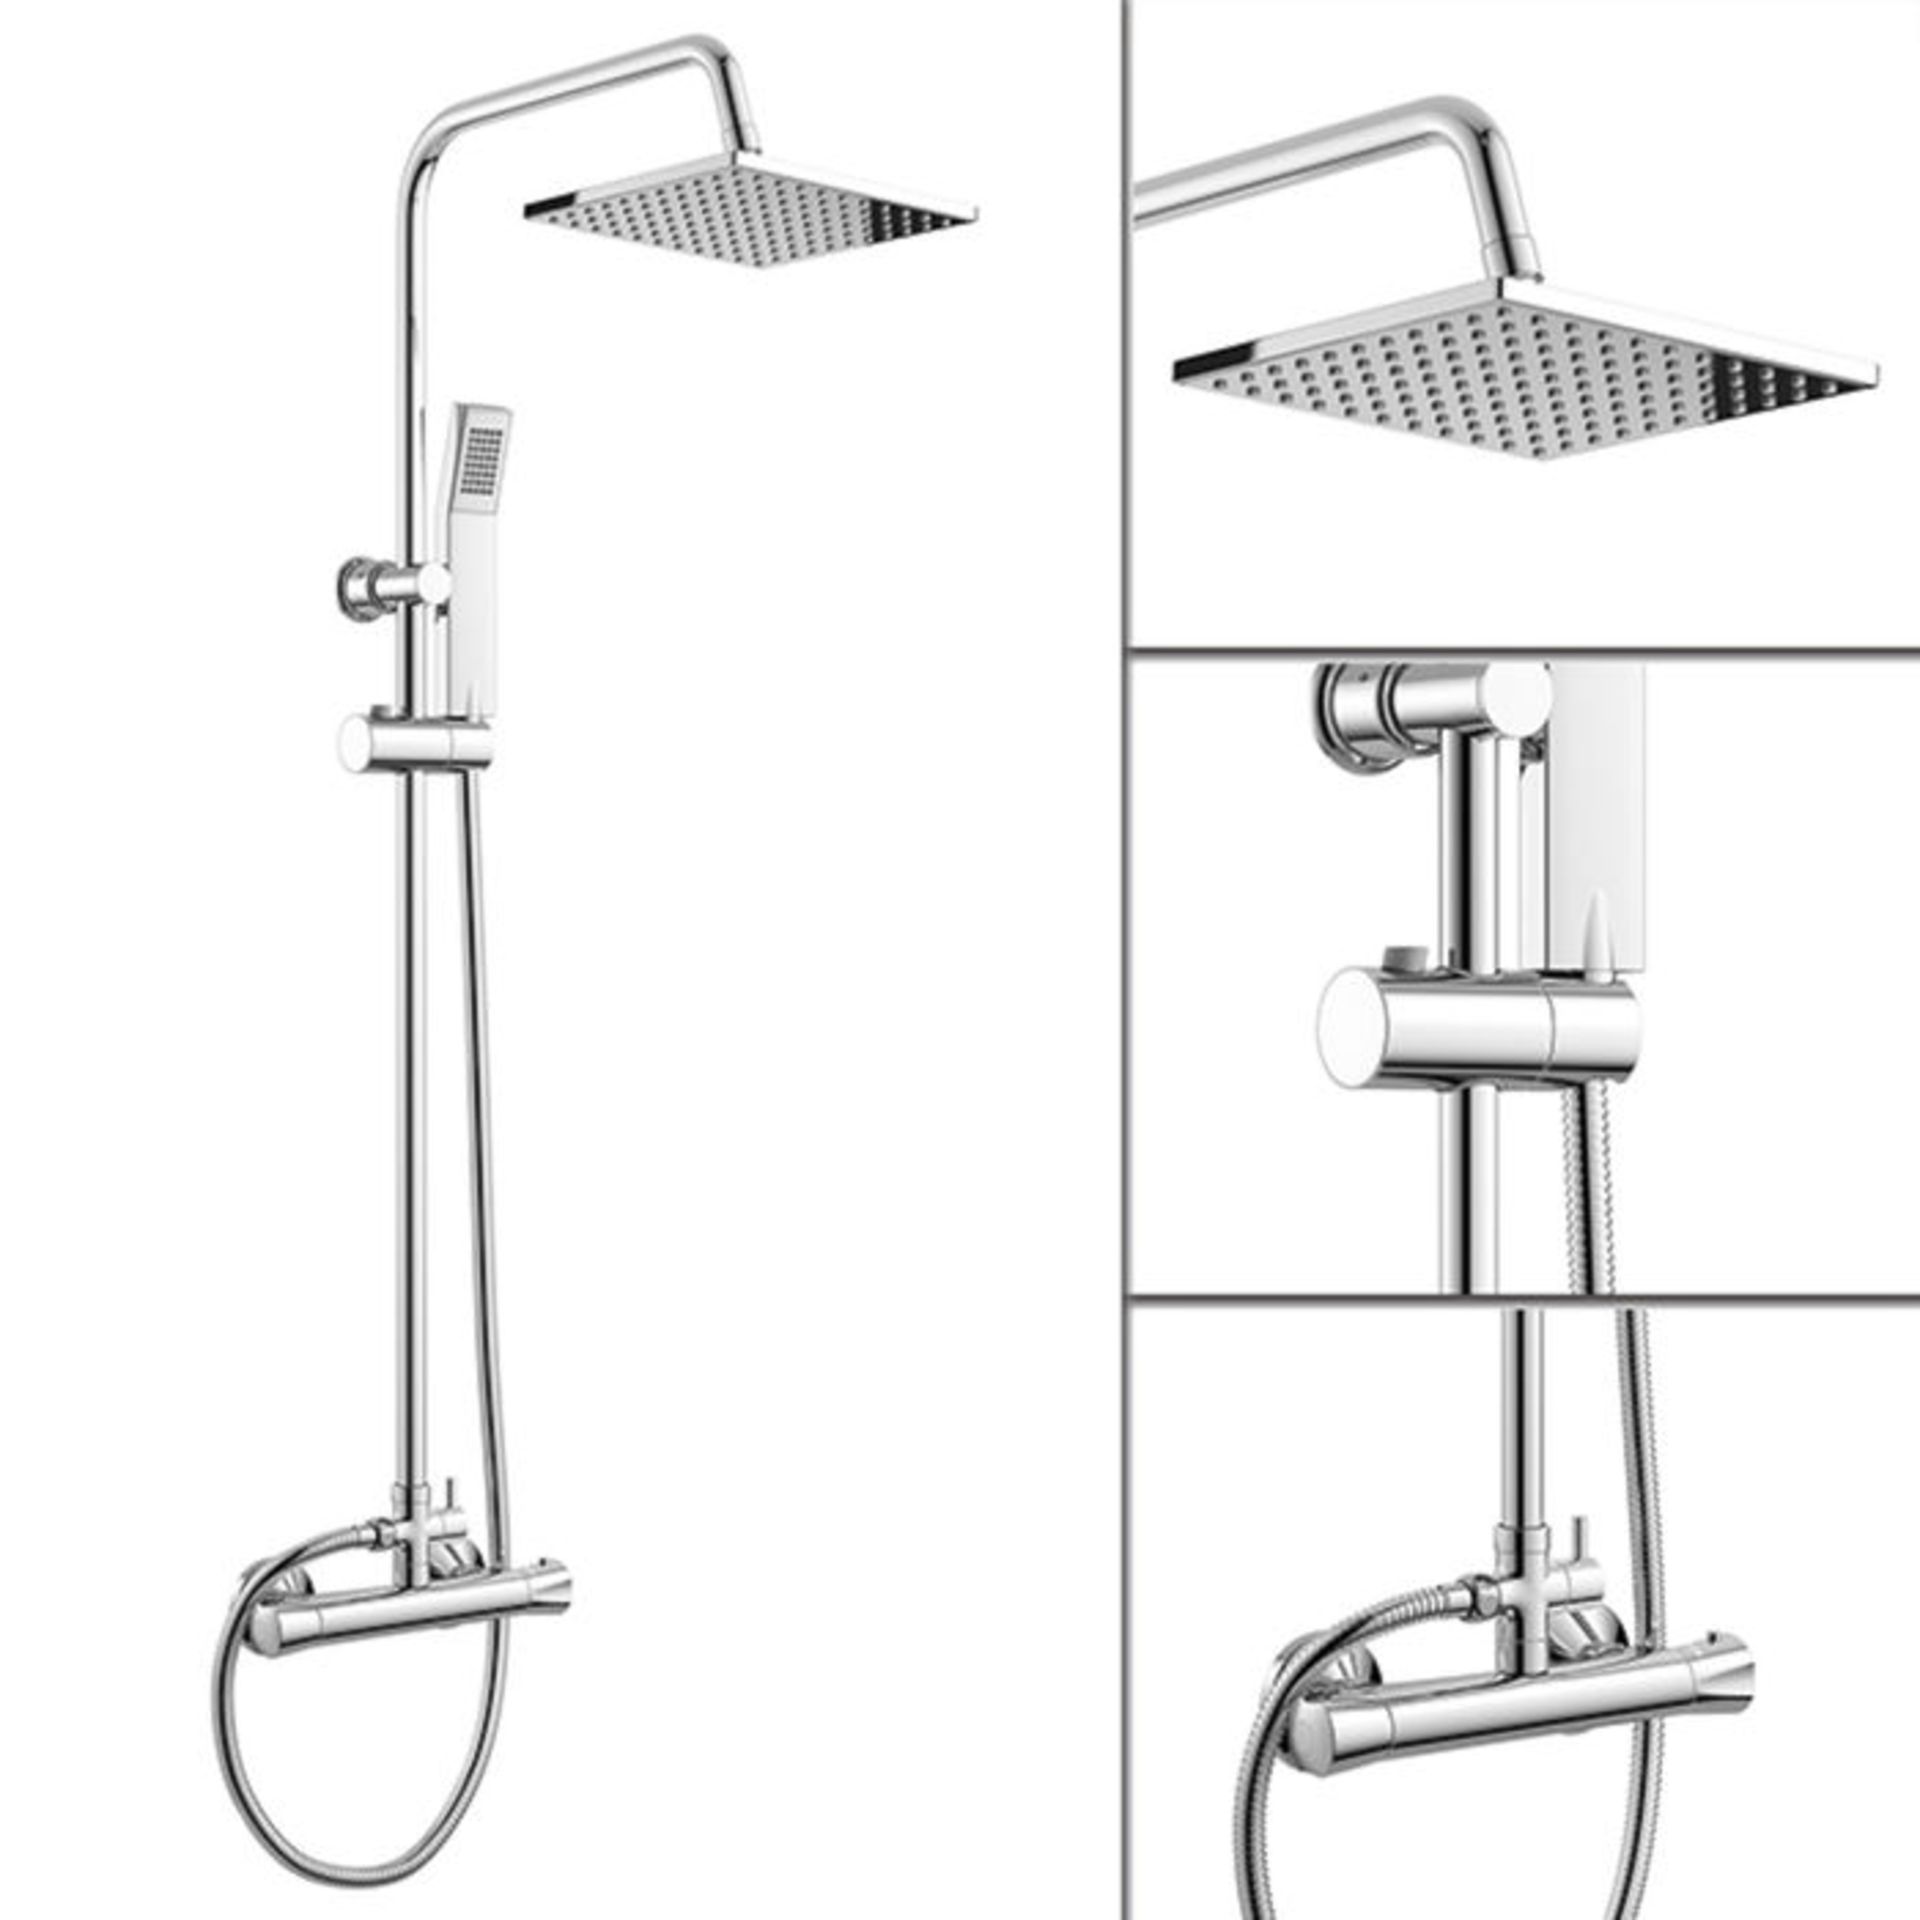 (ED80) Essentials Range - Square Exposed Thermostatic Shower Kit & Head. Curved features and